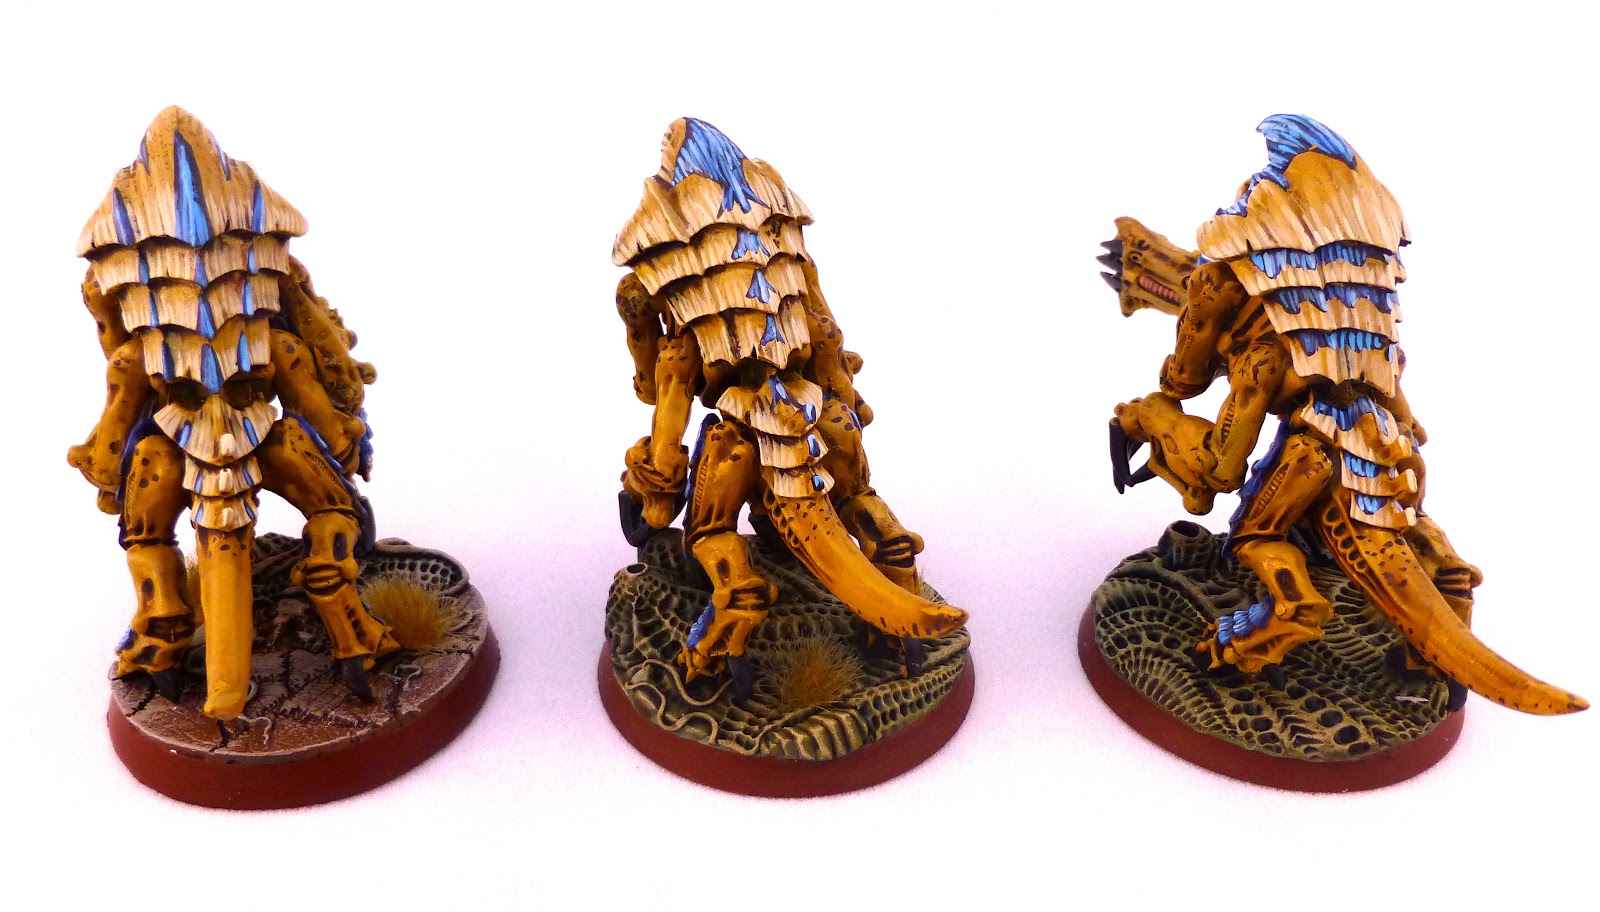 Second Hive Guard Brood finished.